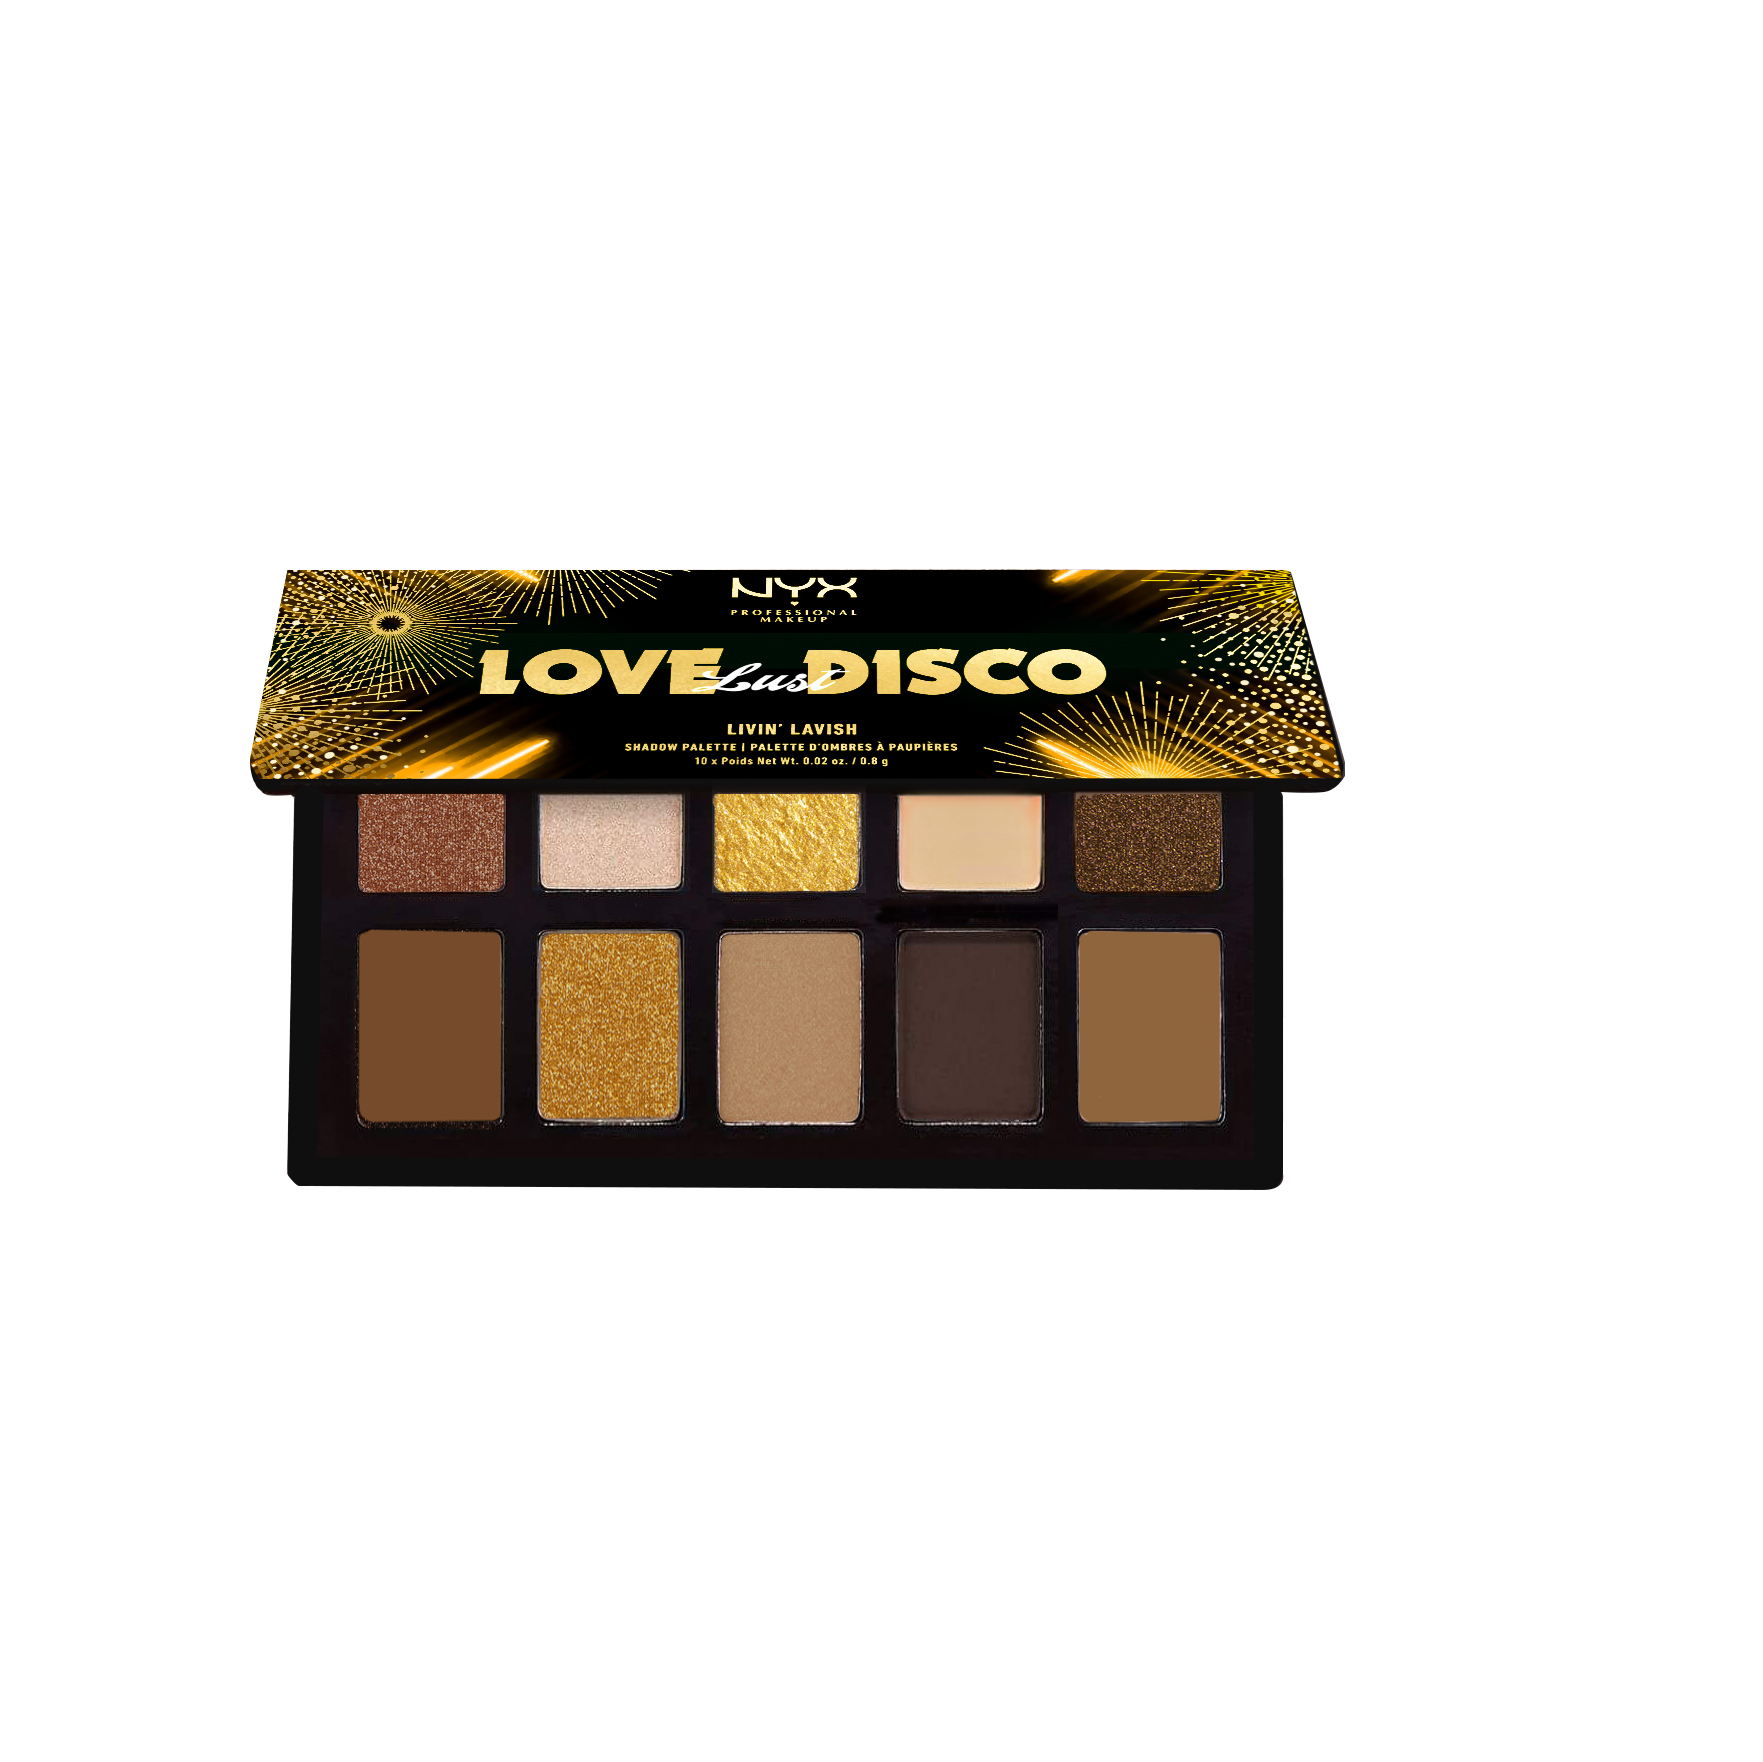 Image of NYX-PROFESSIONAL-MAKEUP Love Lust Disco Eyeshadow Palette 01